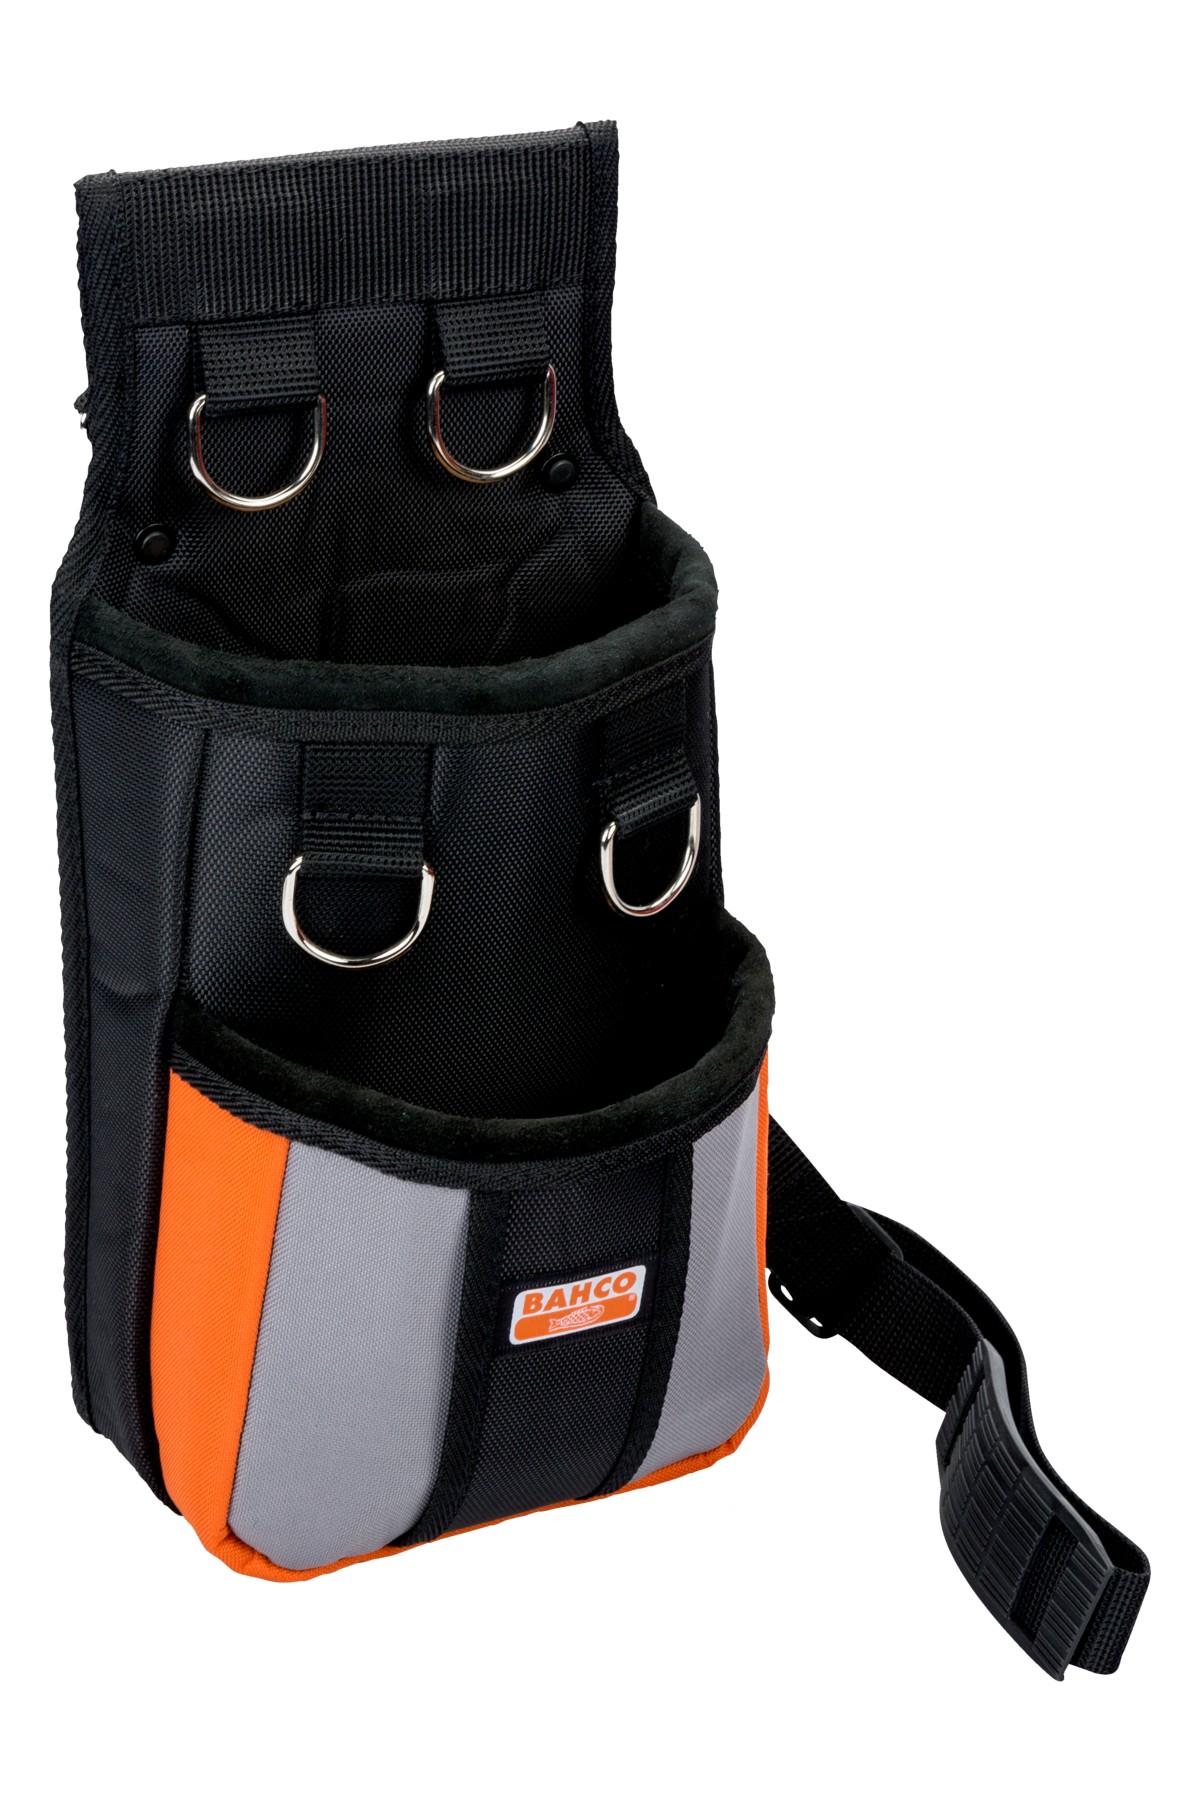 Pockets with 2 large compartments and 4 safety eyes for attaching a safety line